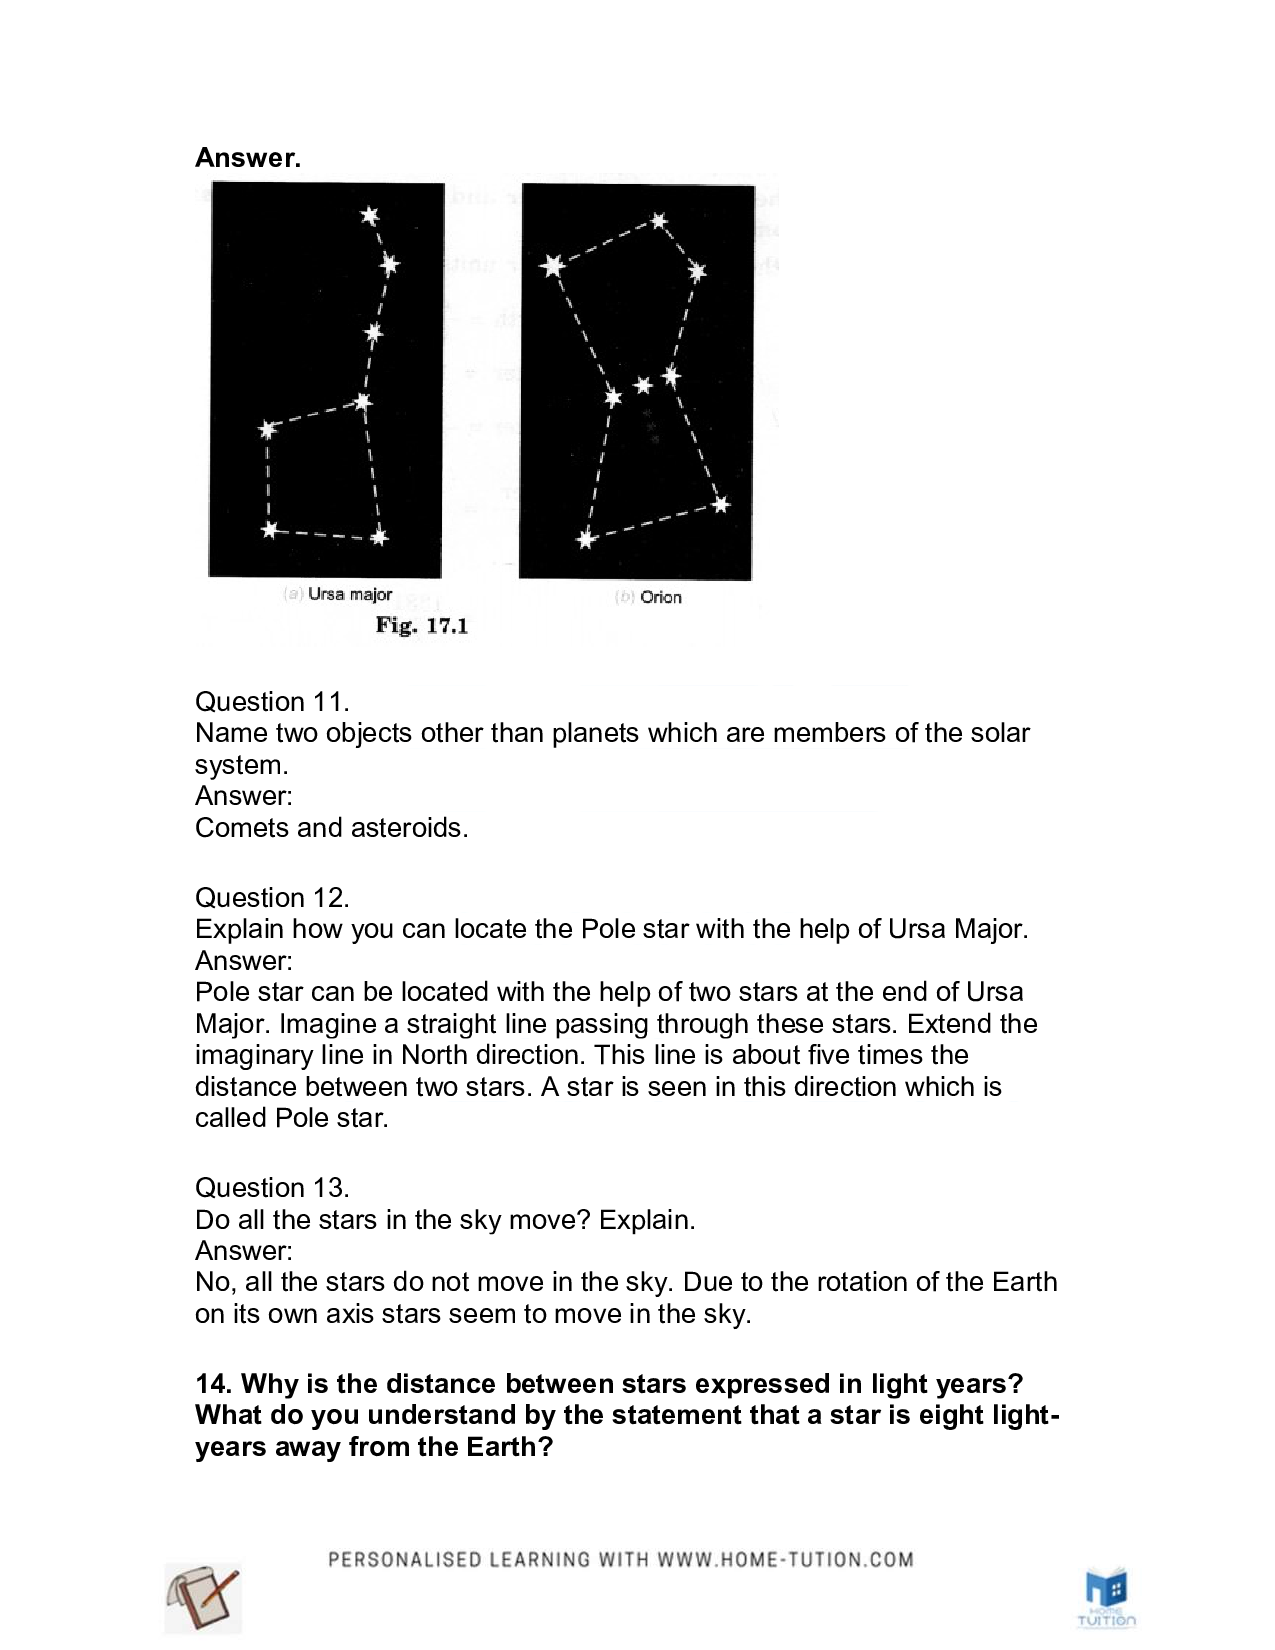 Class 8 Science Chapter 17 Stars and the Solar System